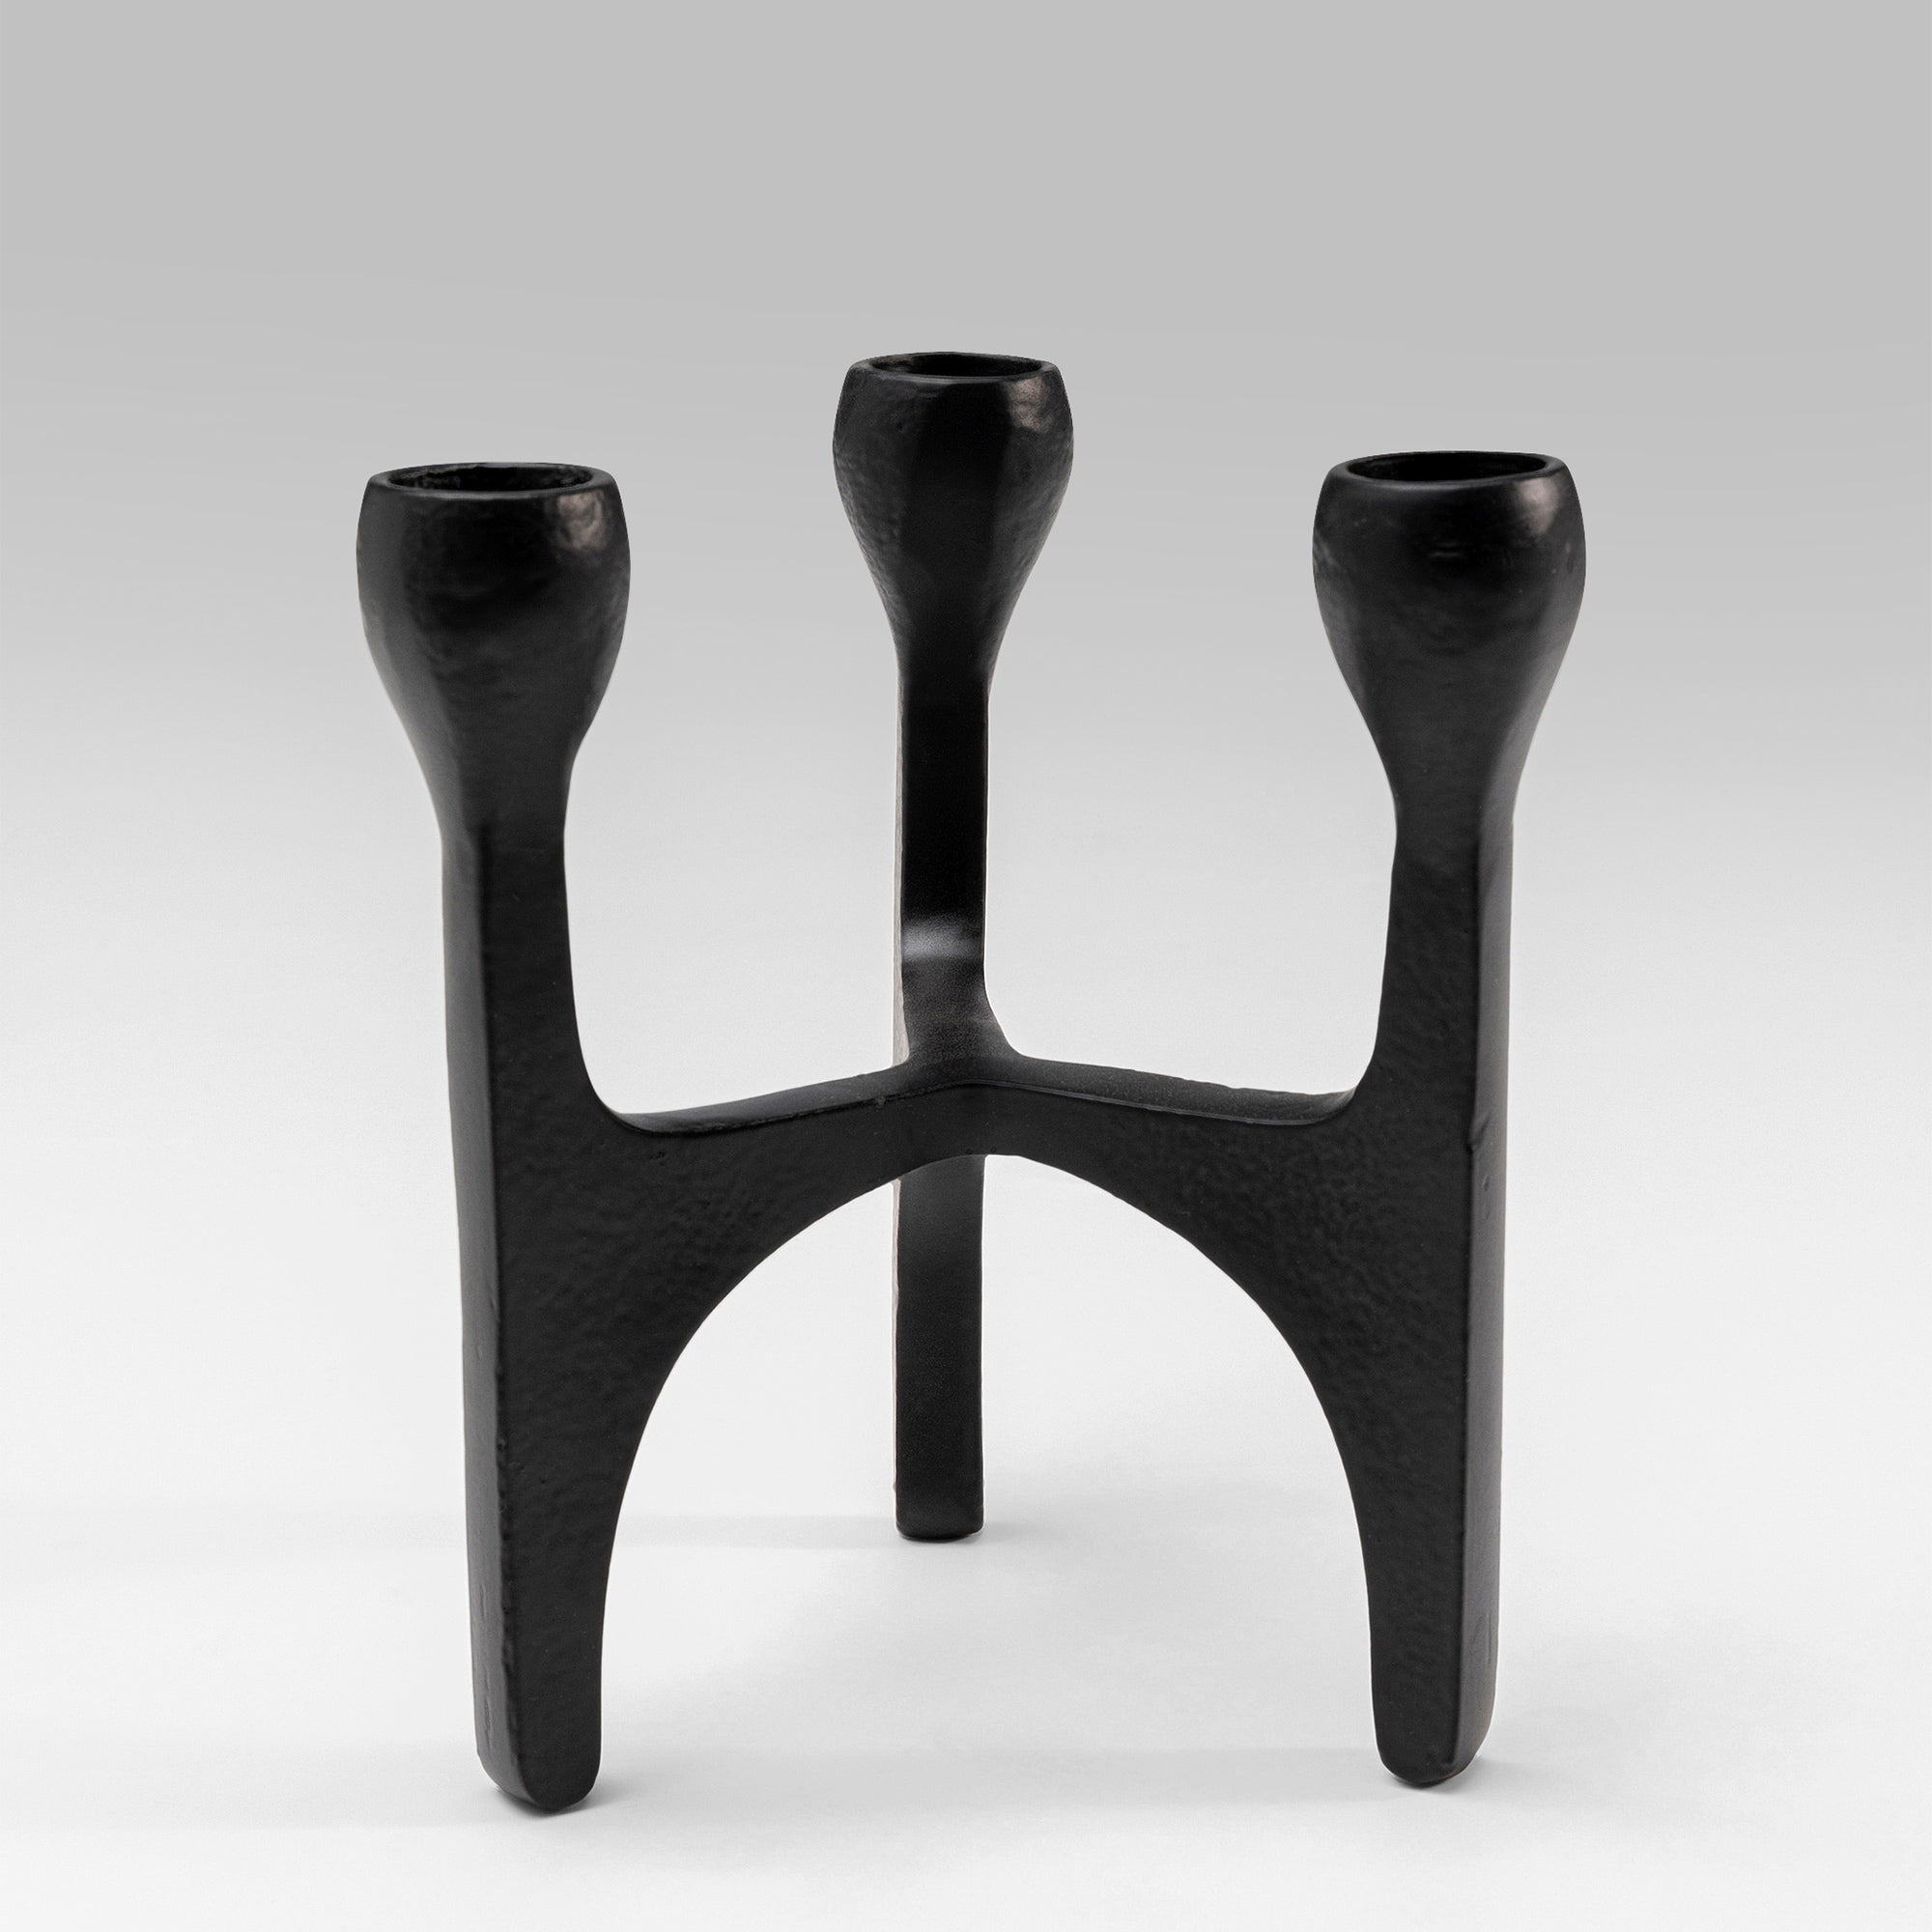 Stacky Candle Holder Black